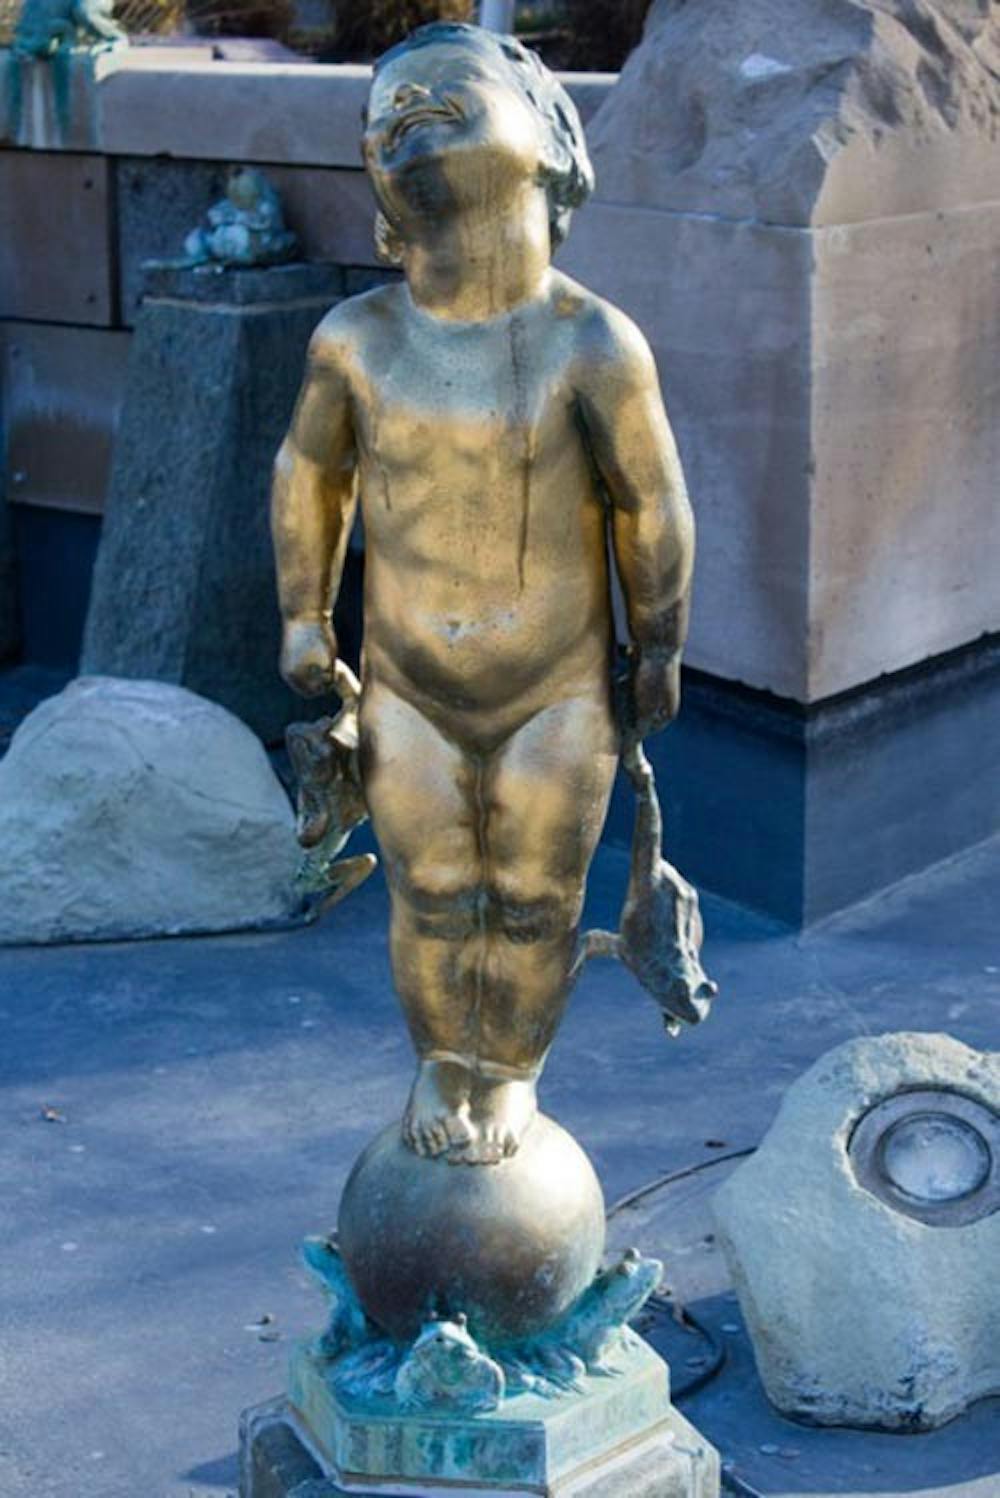 Frog Baby sports a new coat of gold paint Dec. 14. The act of vandalism to the iconic statue has left some students outraged. DN FILE PHOTO TAYLOR IRBY